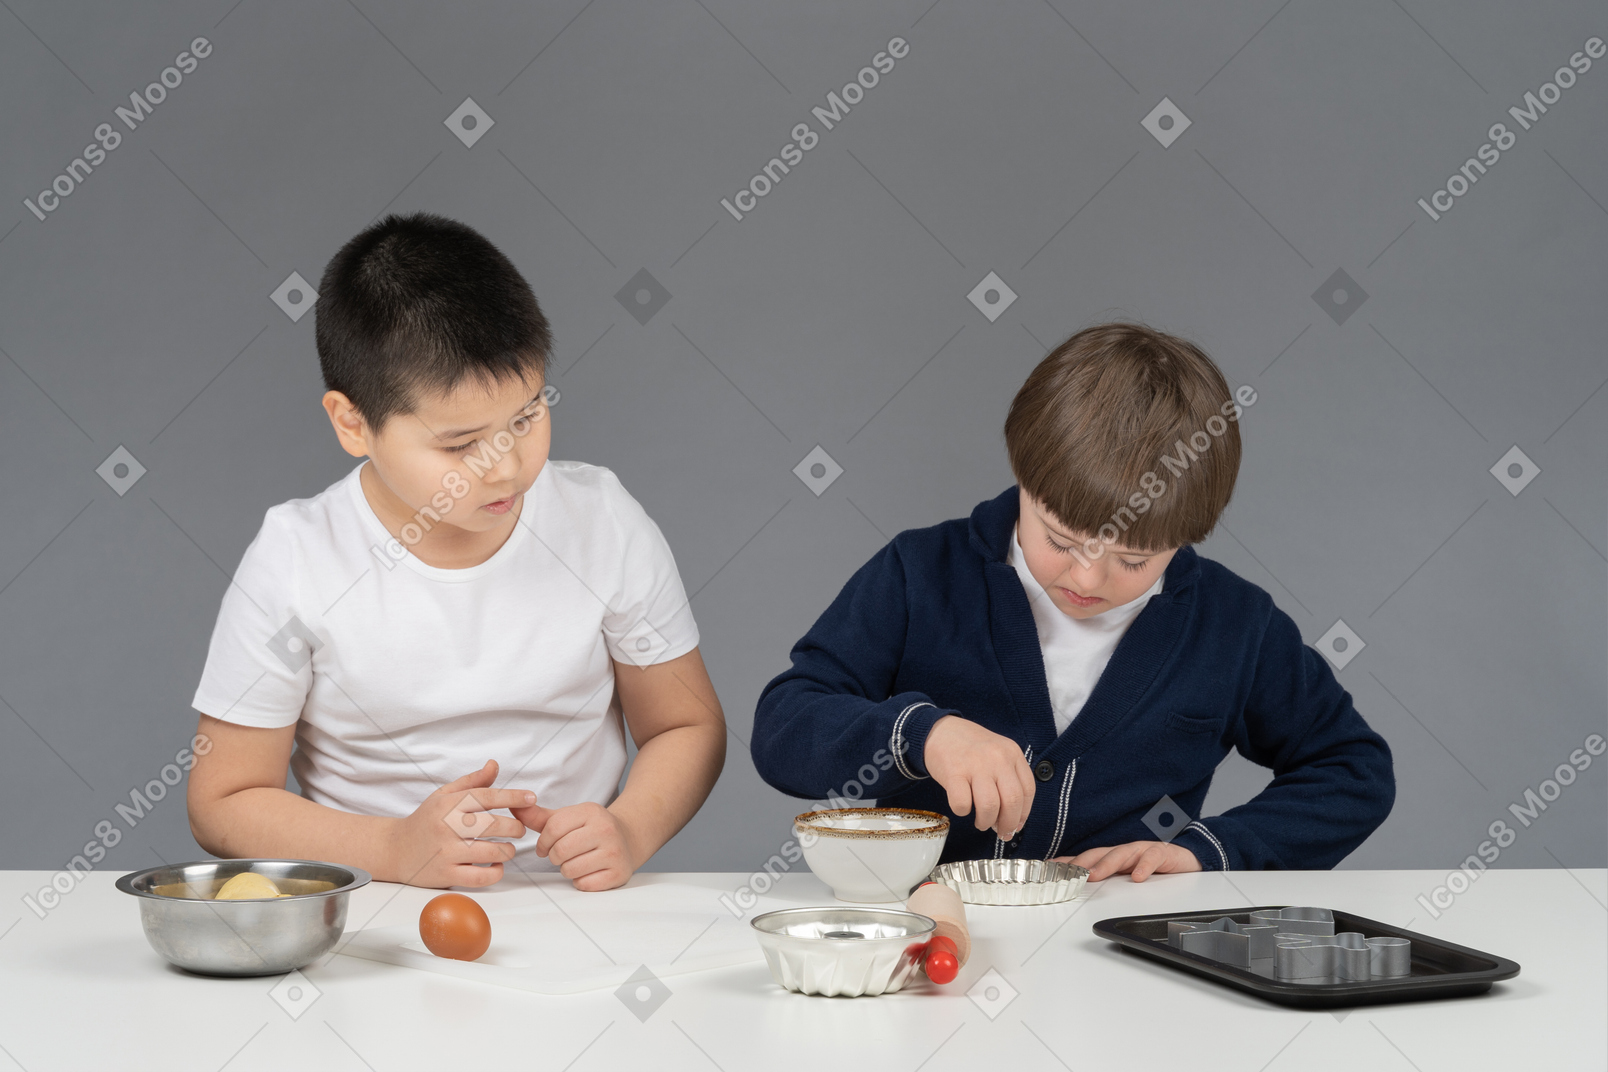 Boys are focused on baking process